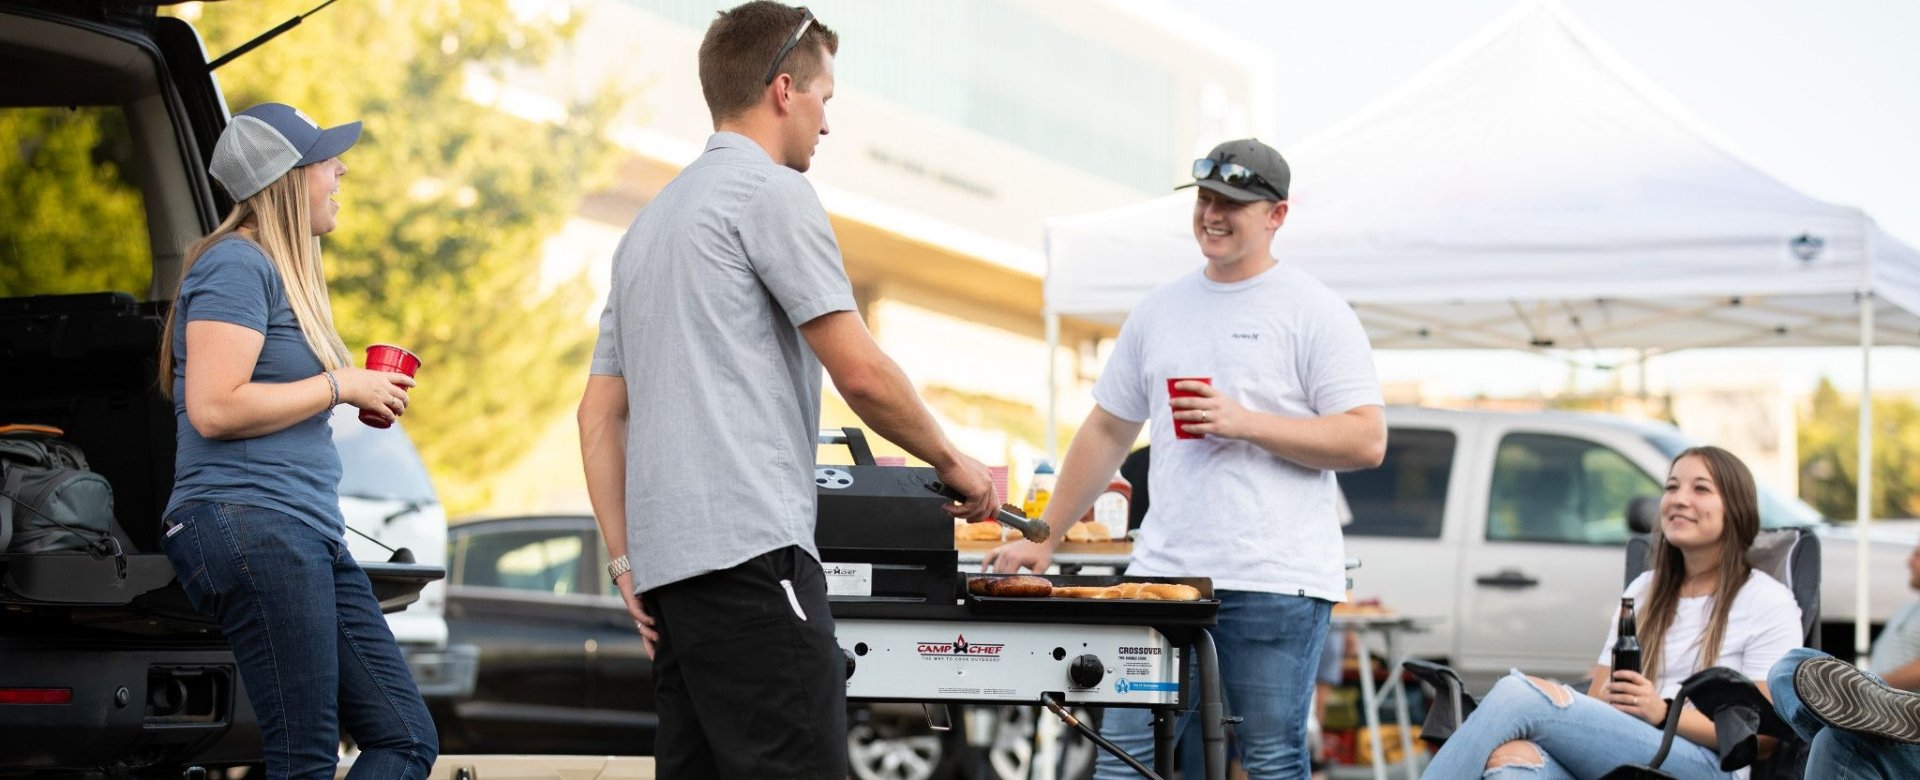 7 Touchdown-worthy Tailgating Products